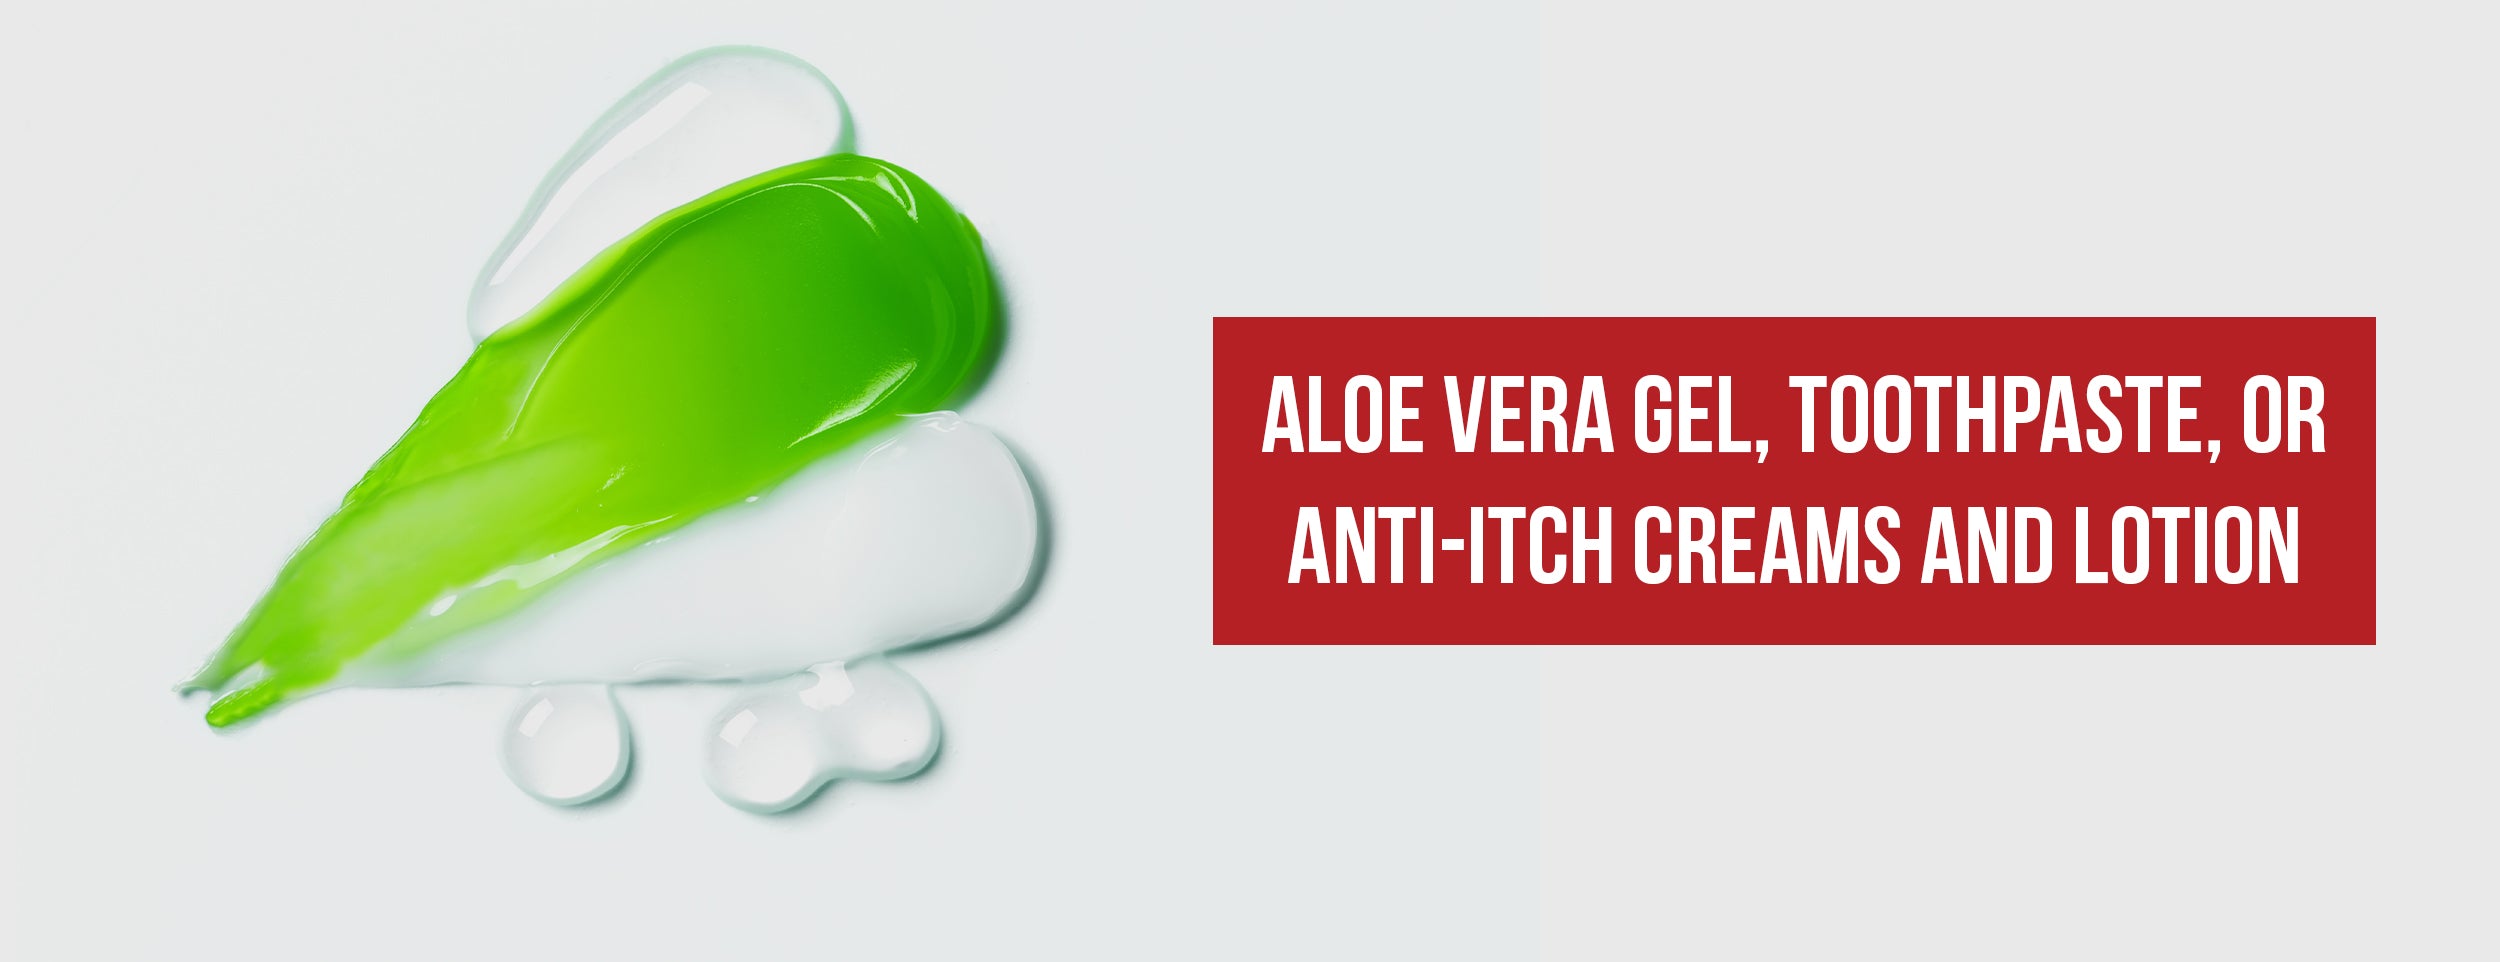 Analoe Vera Gel, Toothpaste, or Anti-itch Creams and Lotions